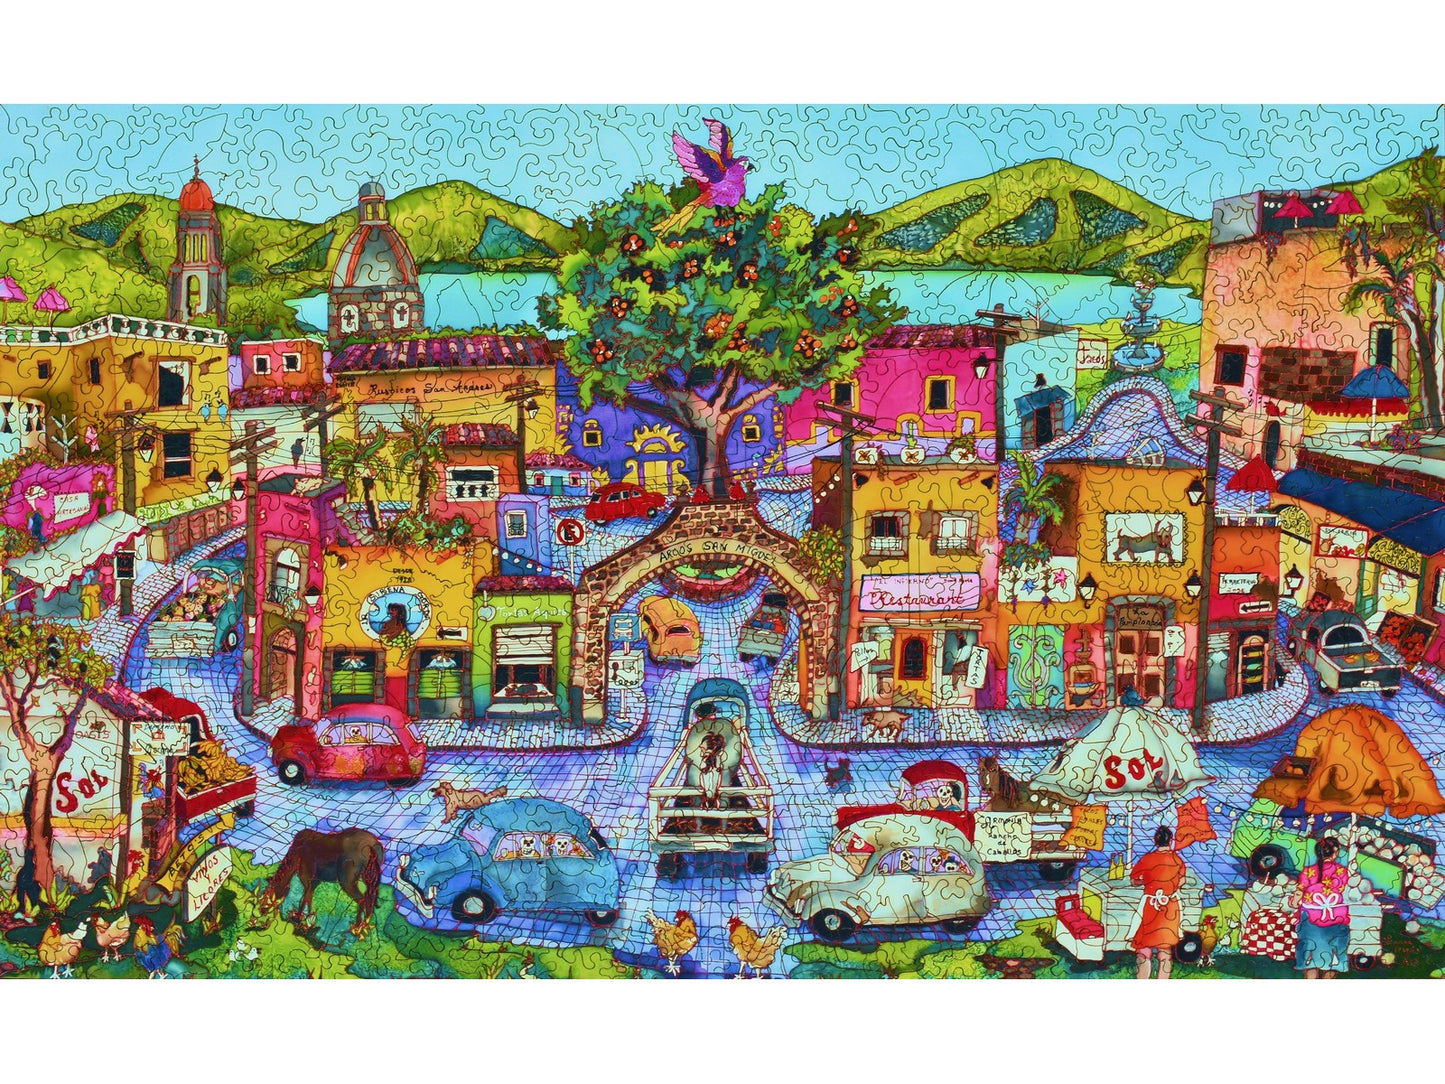 The front of the puzzle, San Miguel de Allende, which shows a colorful city street in Mexico.